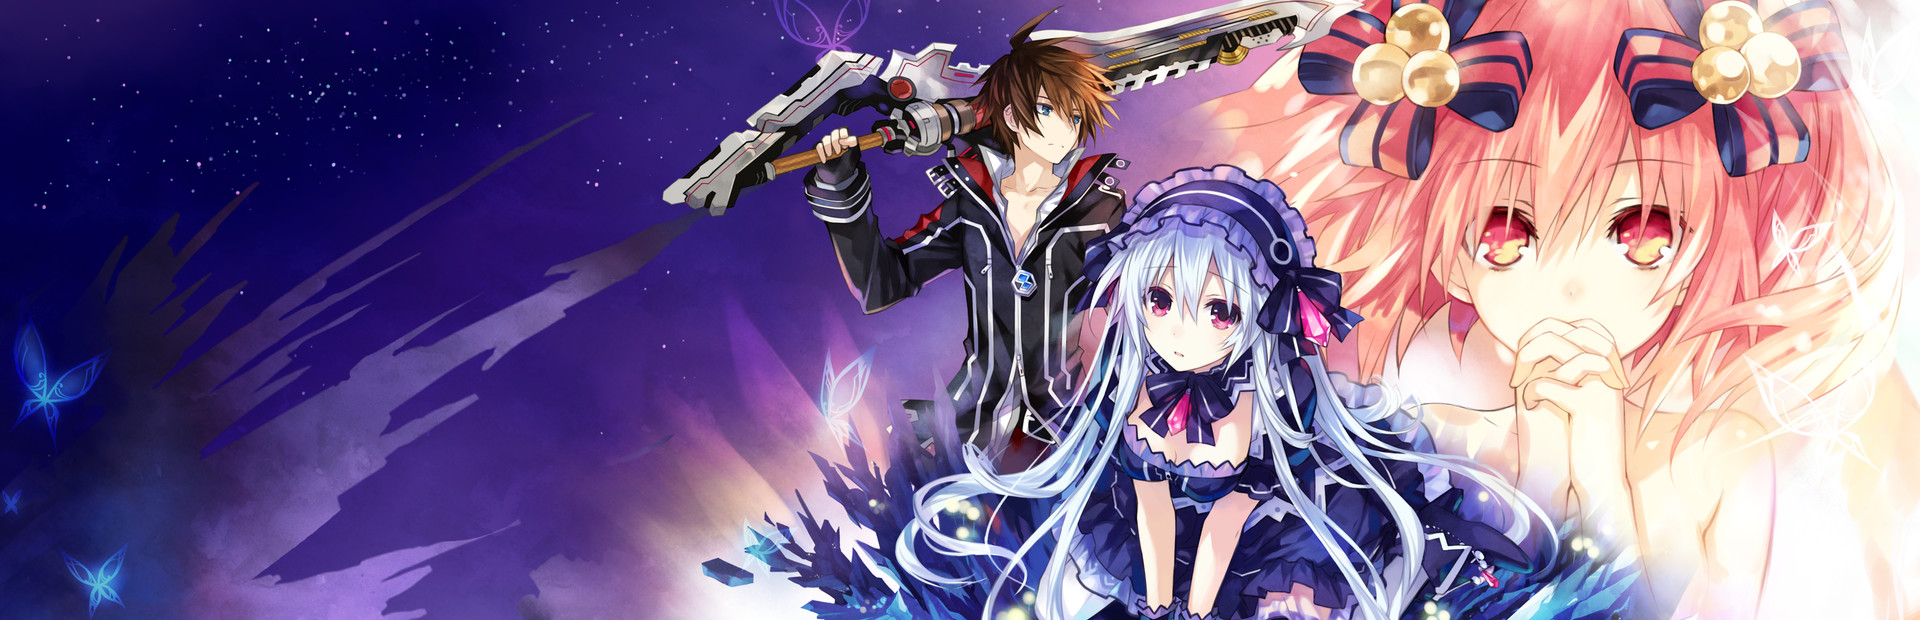 Fairy Fencer F cover image